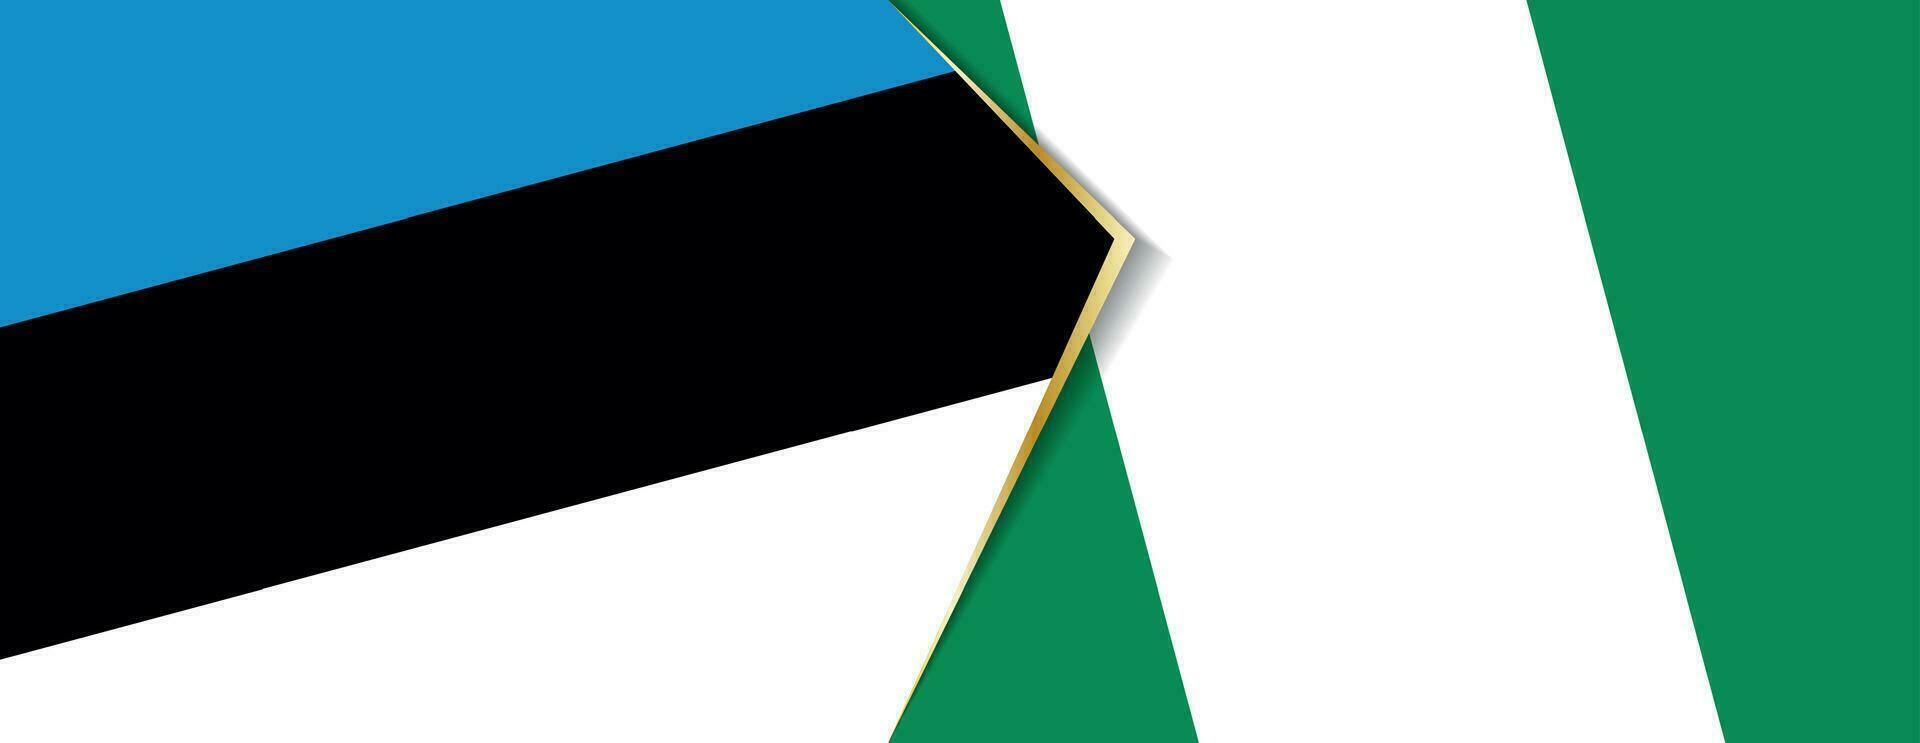 Estonia and Nigeria flags, two vector flags.